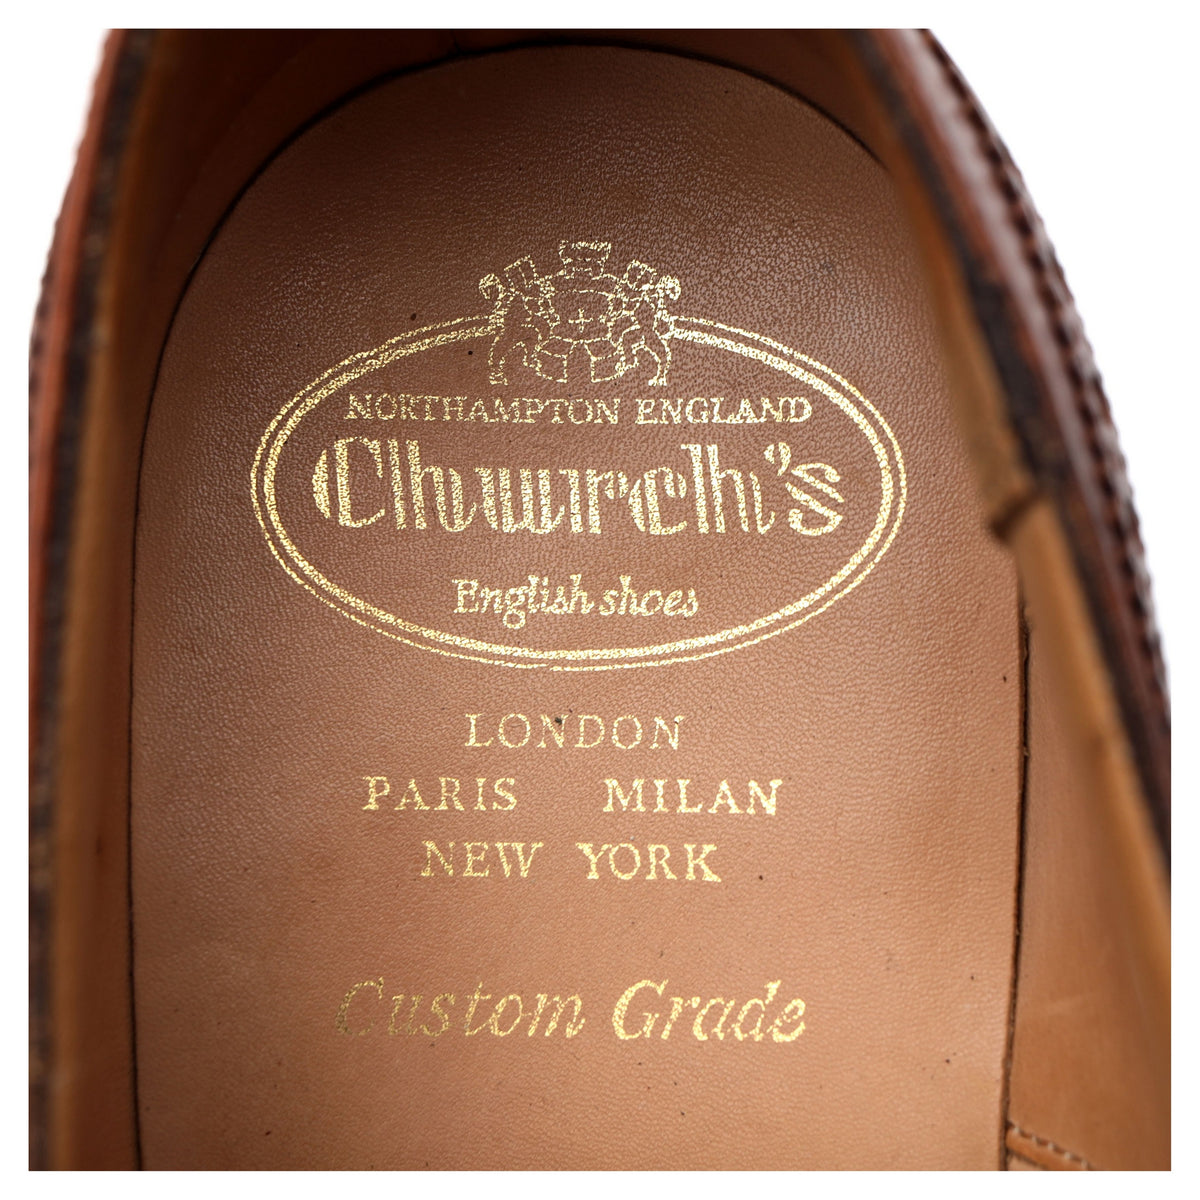 &#39;Chetwynd&#39; Tan Brown Leather Oxford Brogues UK 7.5 G